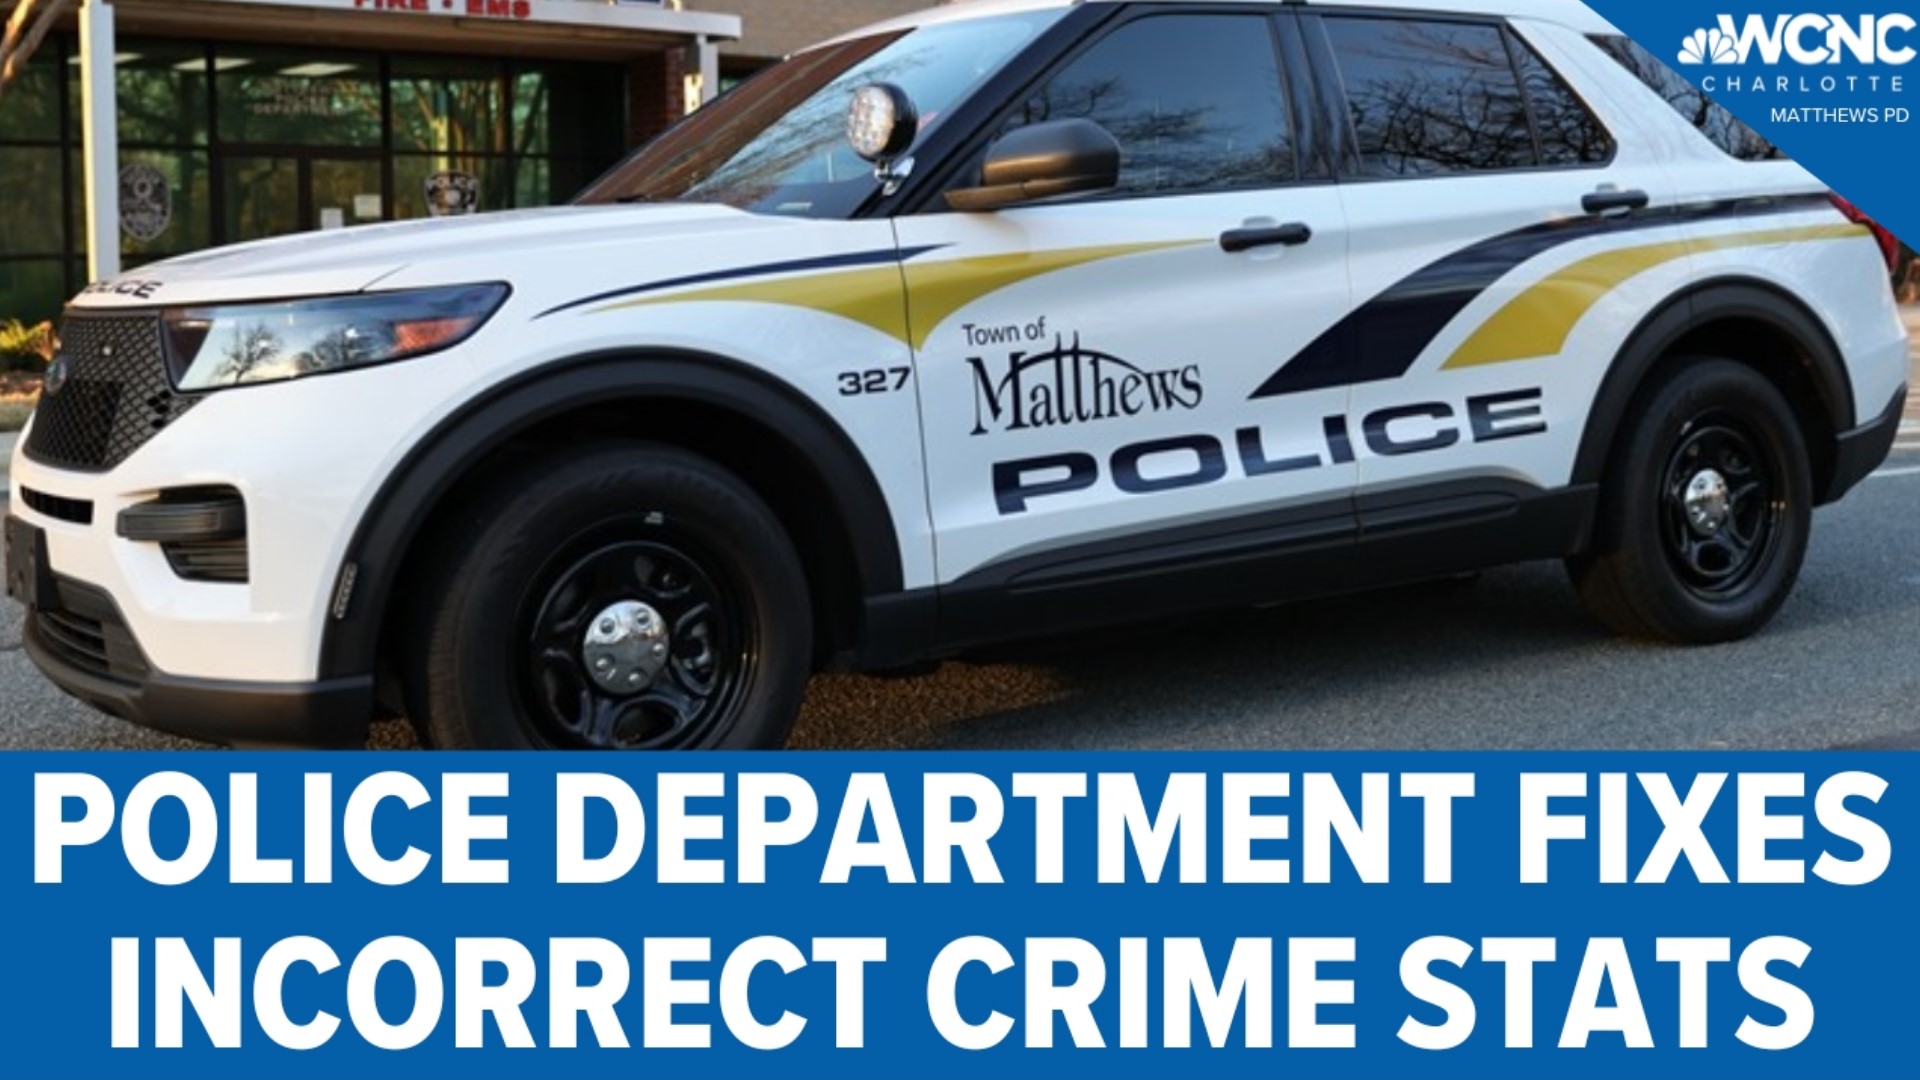 An internal probe revealed the Matthews Police Department had been incorrectly reporting crime stats for the past four years.